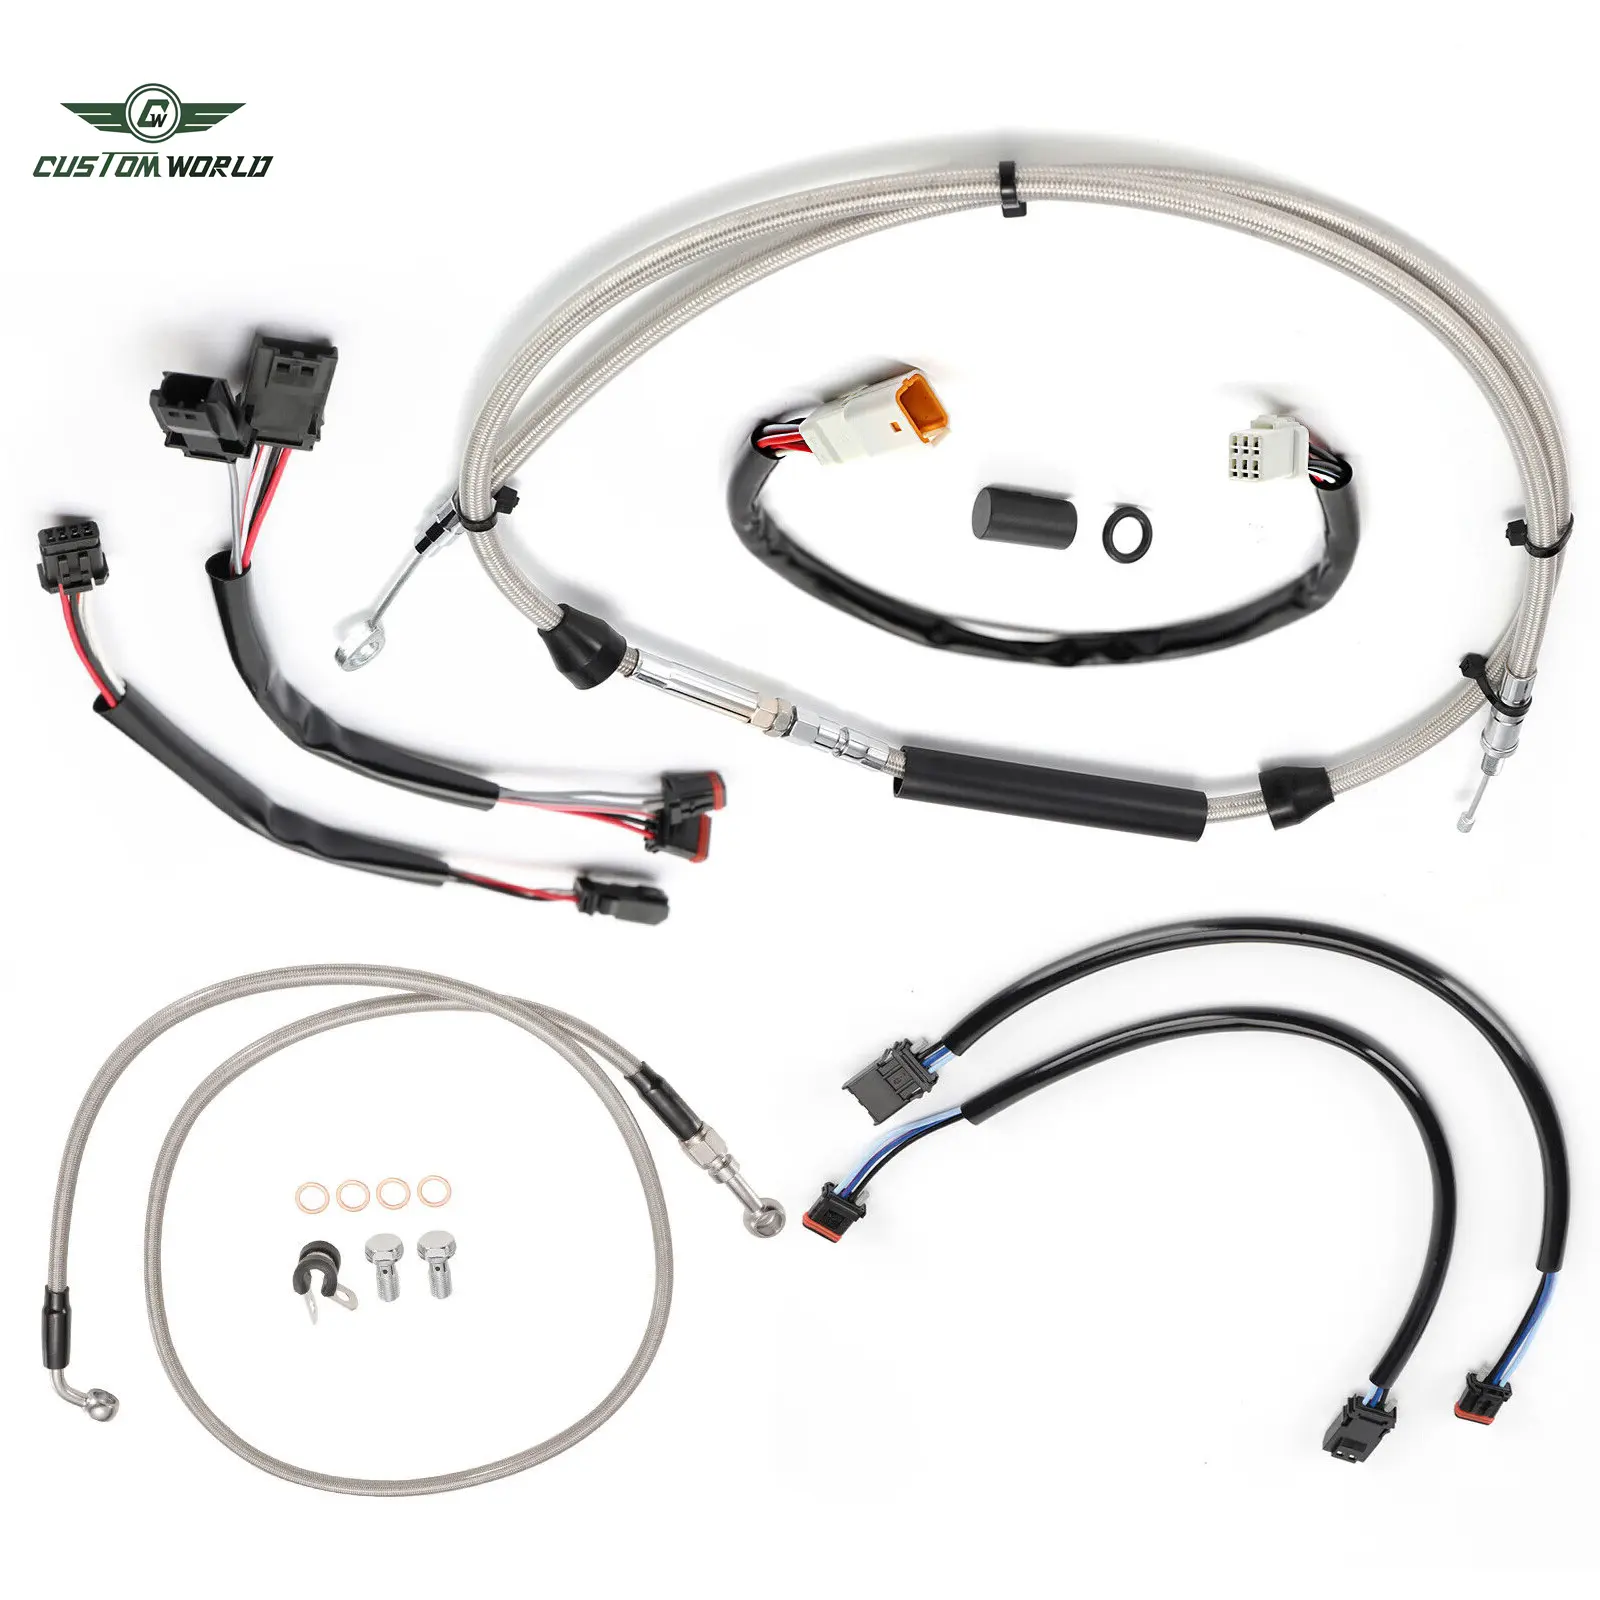 Motorcycle Handlebar Clutch Throttle Cables Brake Line Turn Signal Harness Cable Kits for Softail 2018+ Without ABS